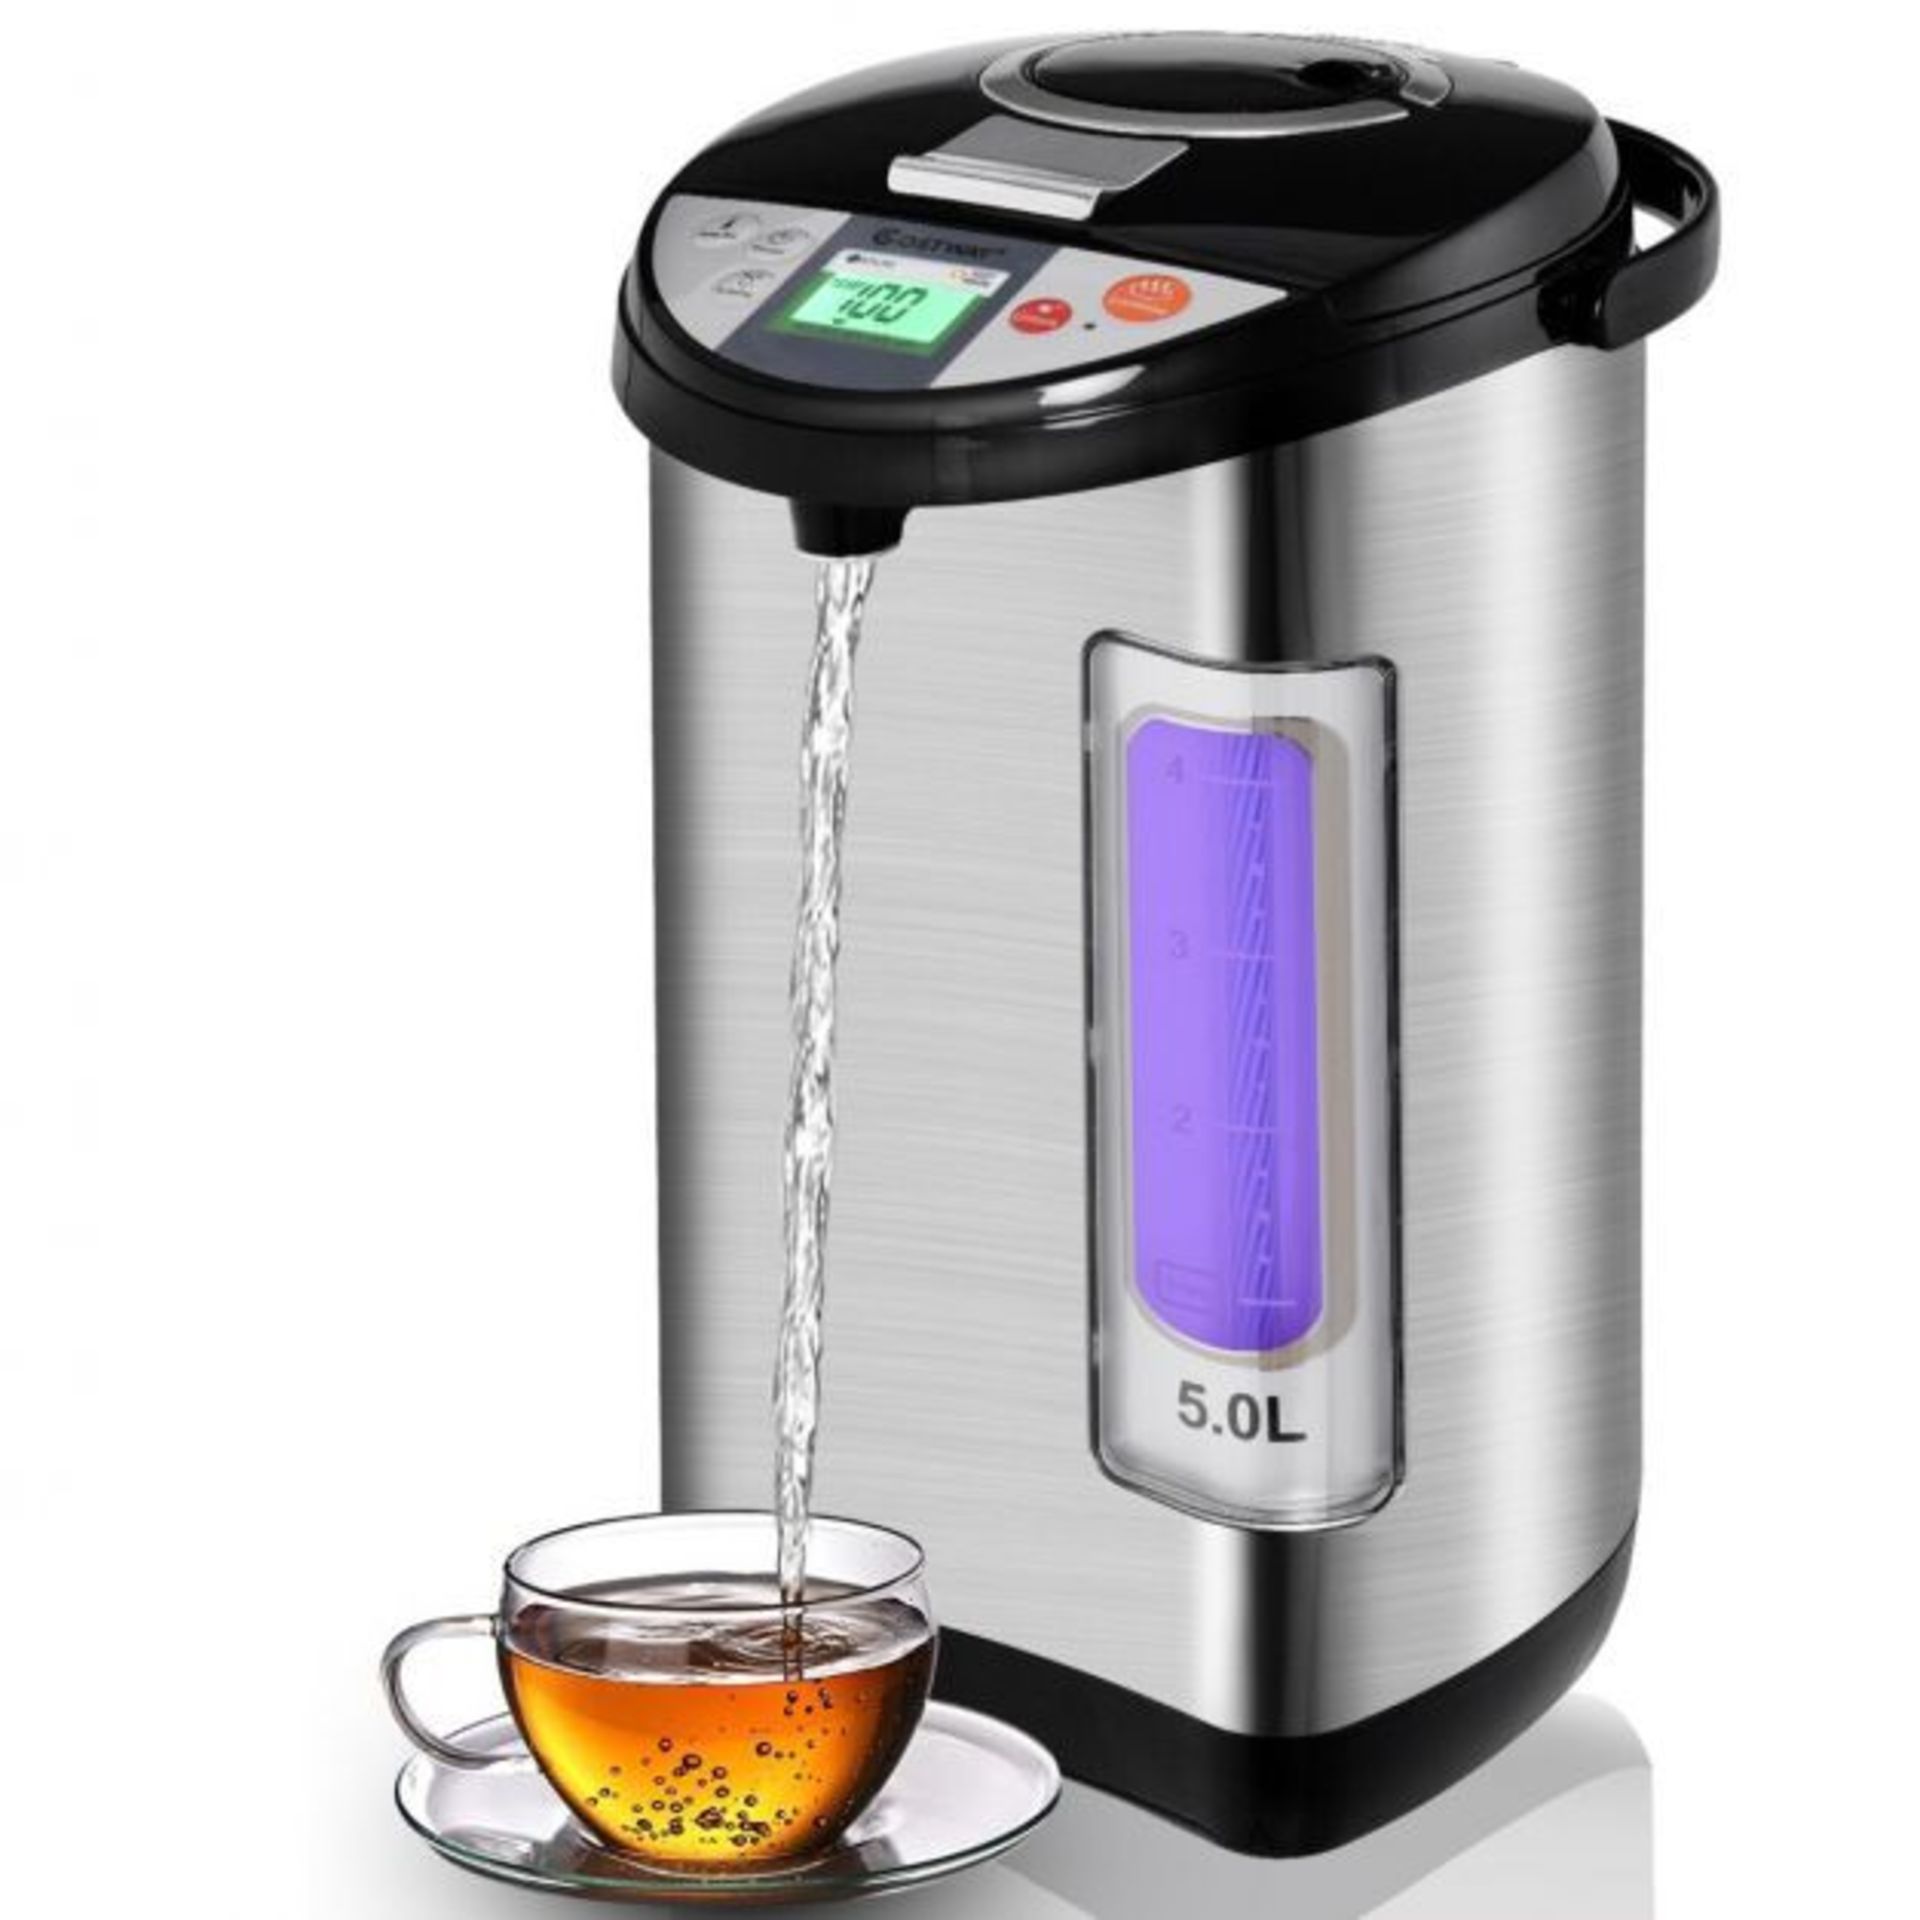 5L Adjustable Instant Hot Electric Water Dispenser with Auto-Cut Off. - ER53. With 5 available